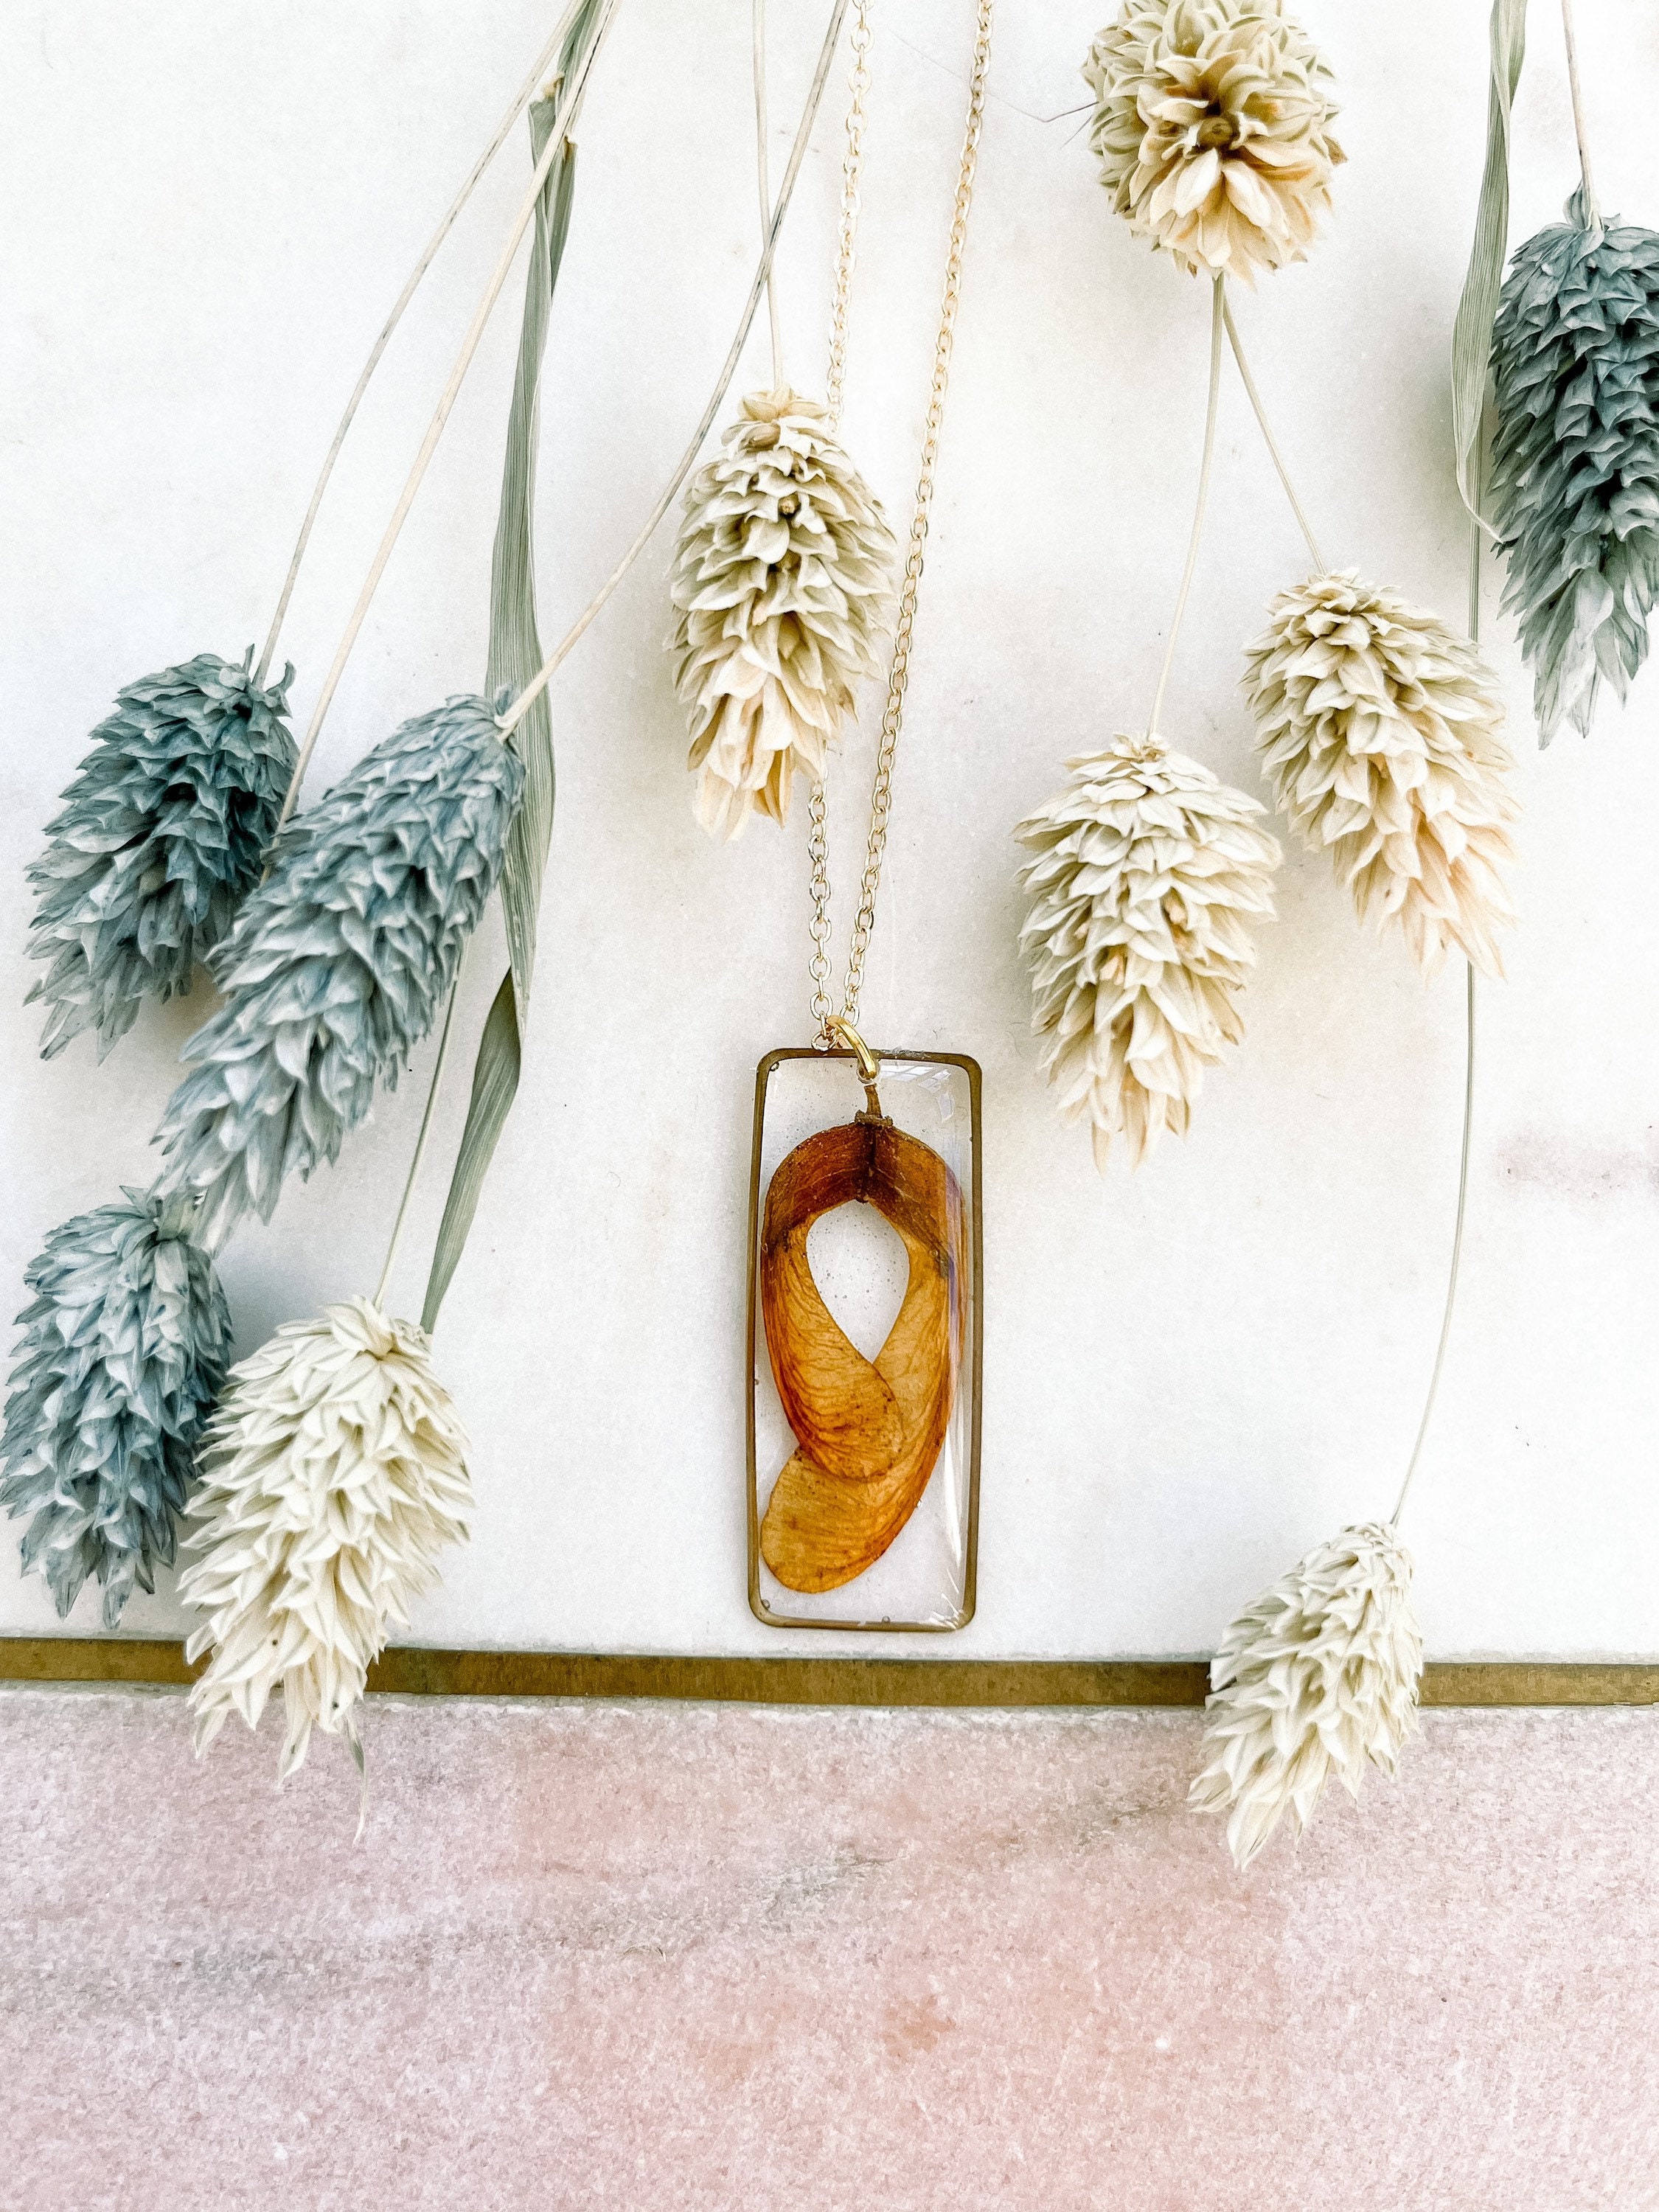 Sycamore Pendant Necklace, Brass Resin, Botanical Jewellery, Pressed Preserved, Rectangle Brass, Gold Chain